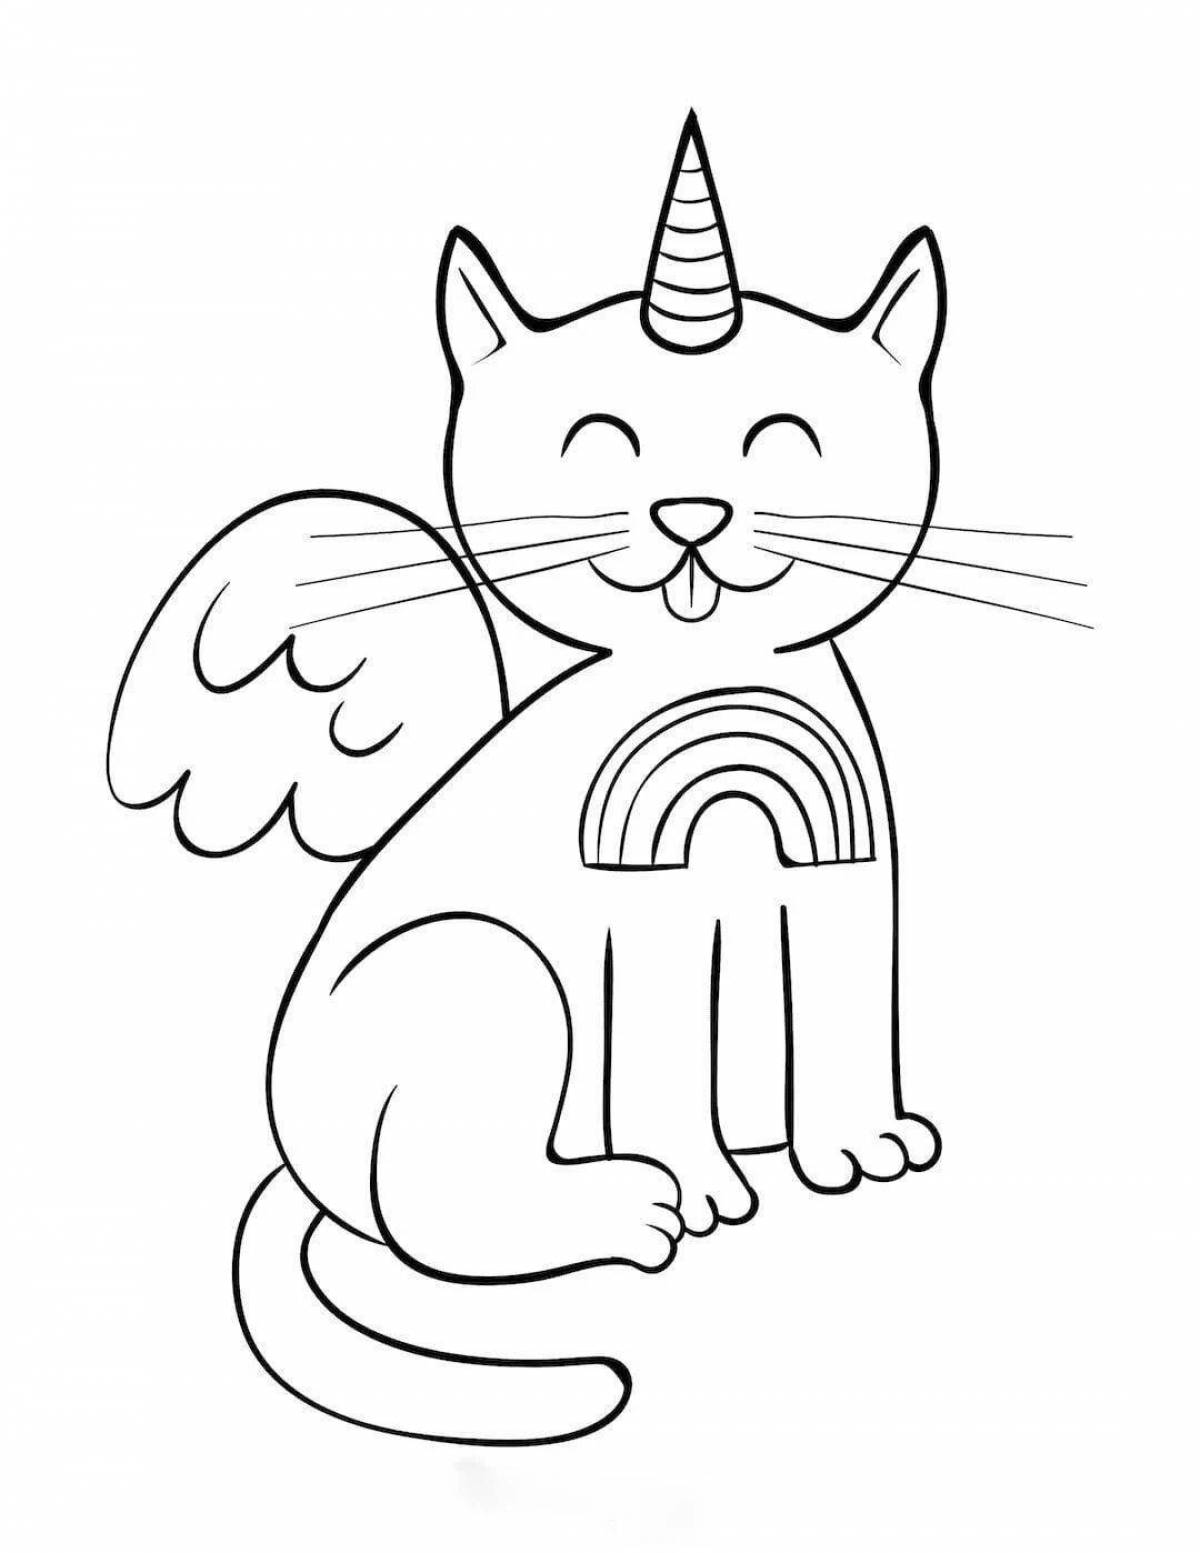 Amazing unicorn cat coloring pages for girls